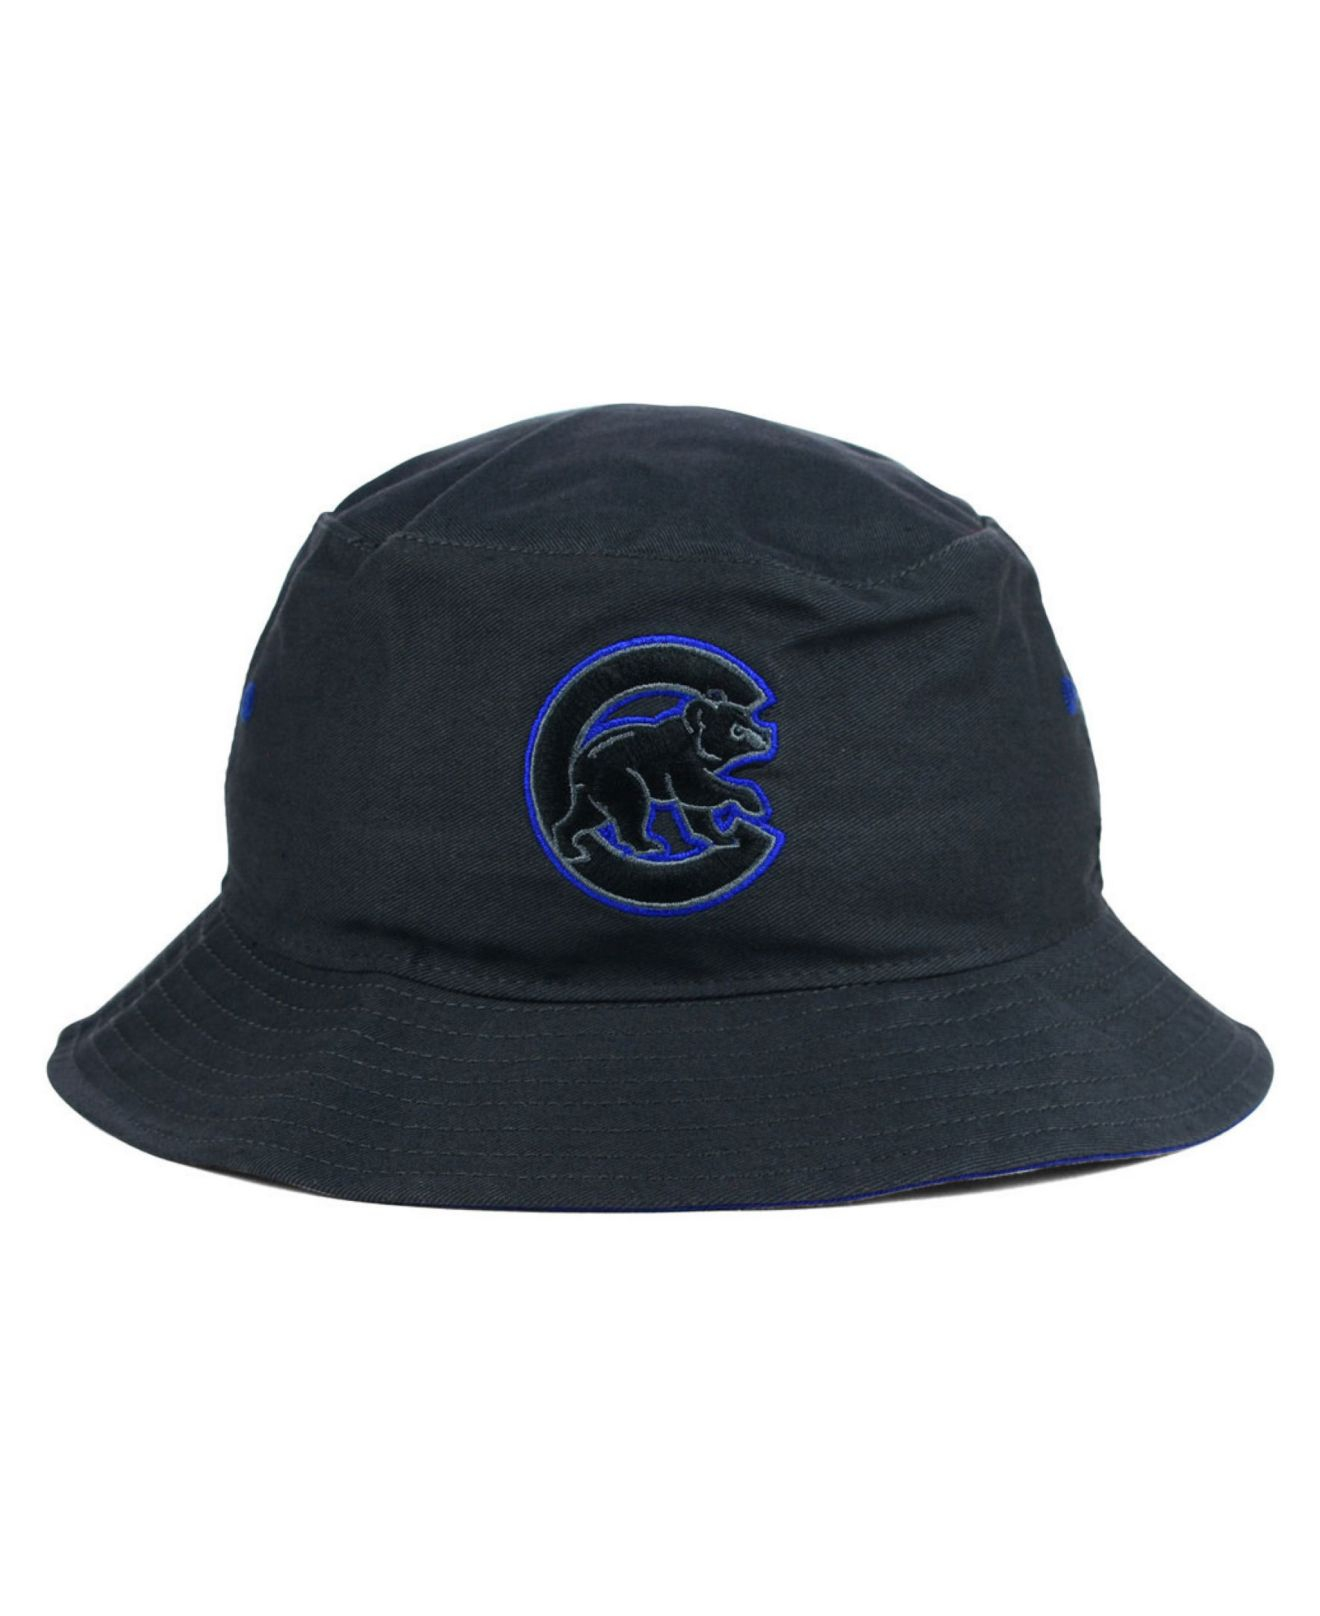 Lyst - 47 Brand Chicago Cubs Turbo Bucket Hat in Blue